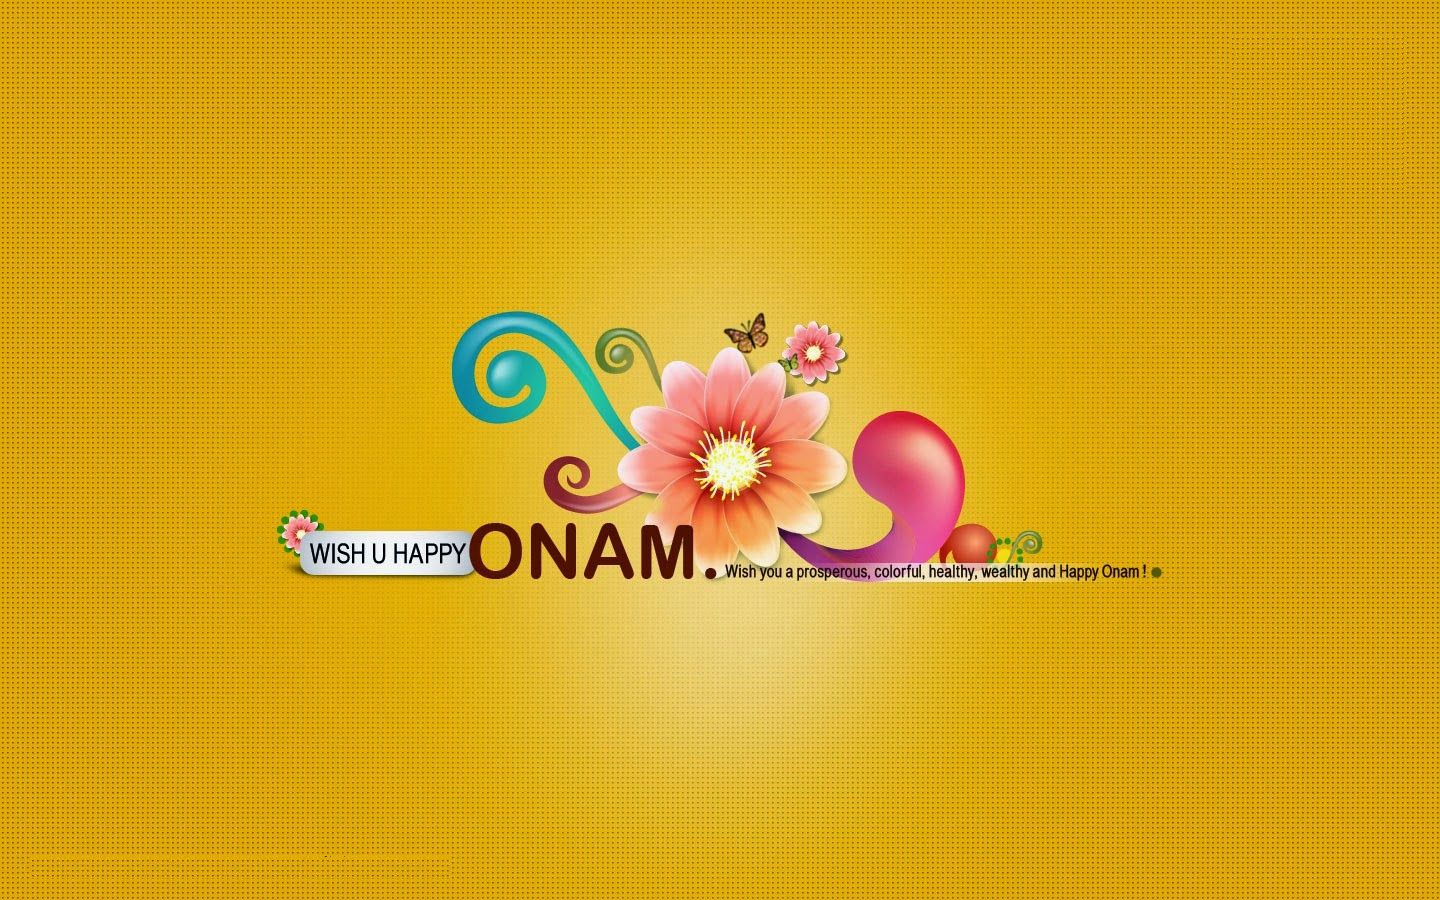 Happy Onam 2018 Wishes With Flood In Kerala - HD Wallpaper 